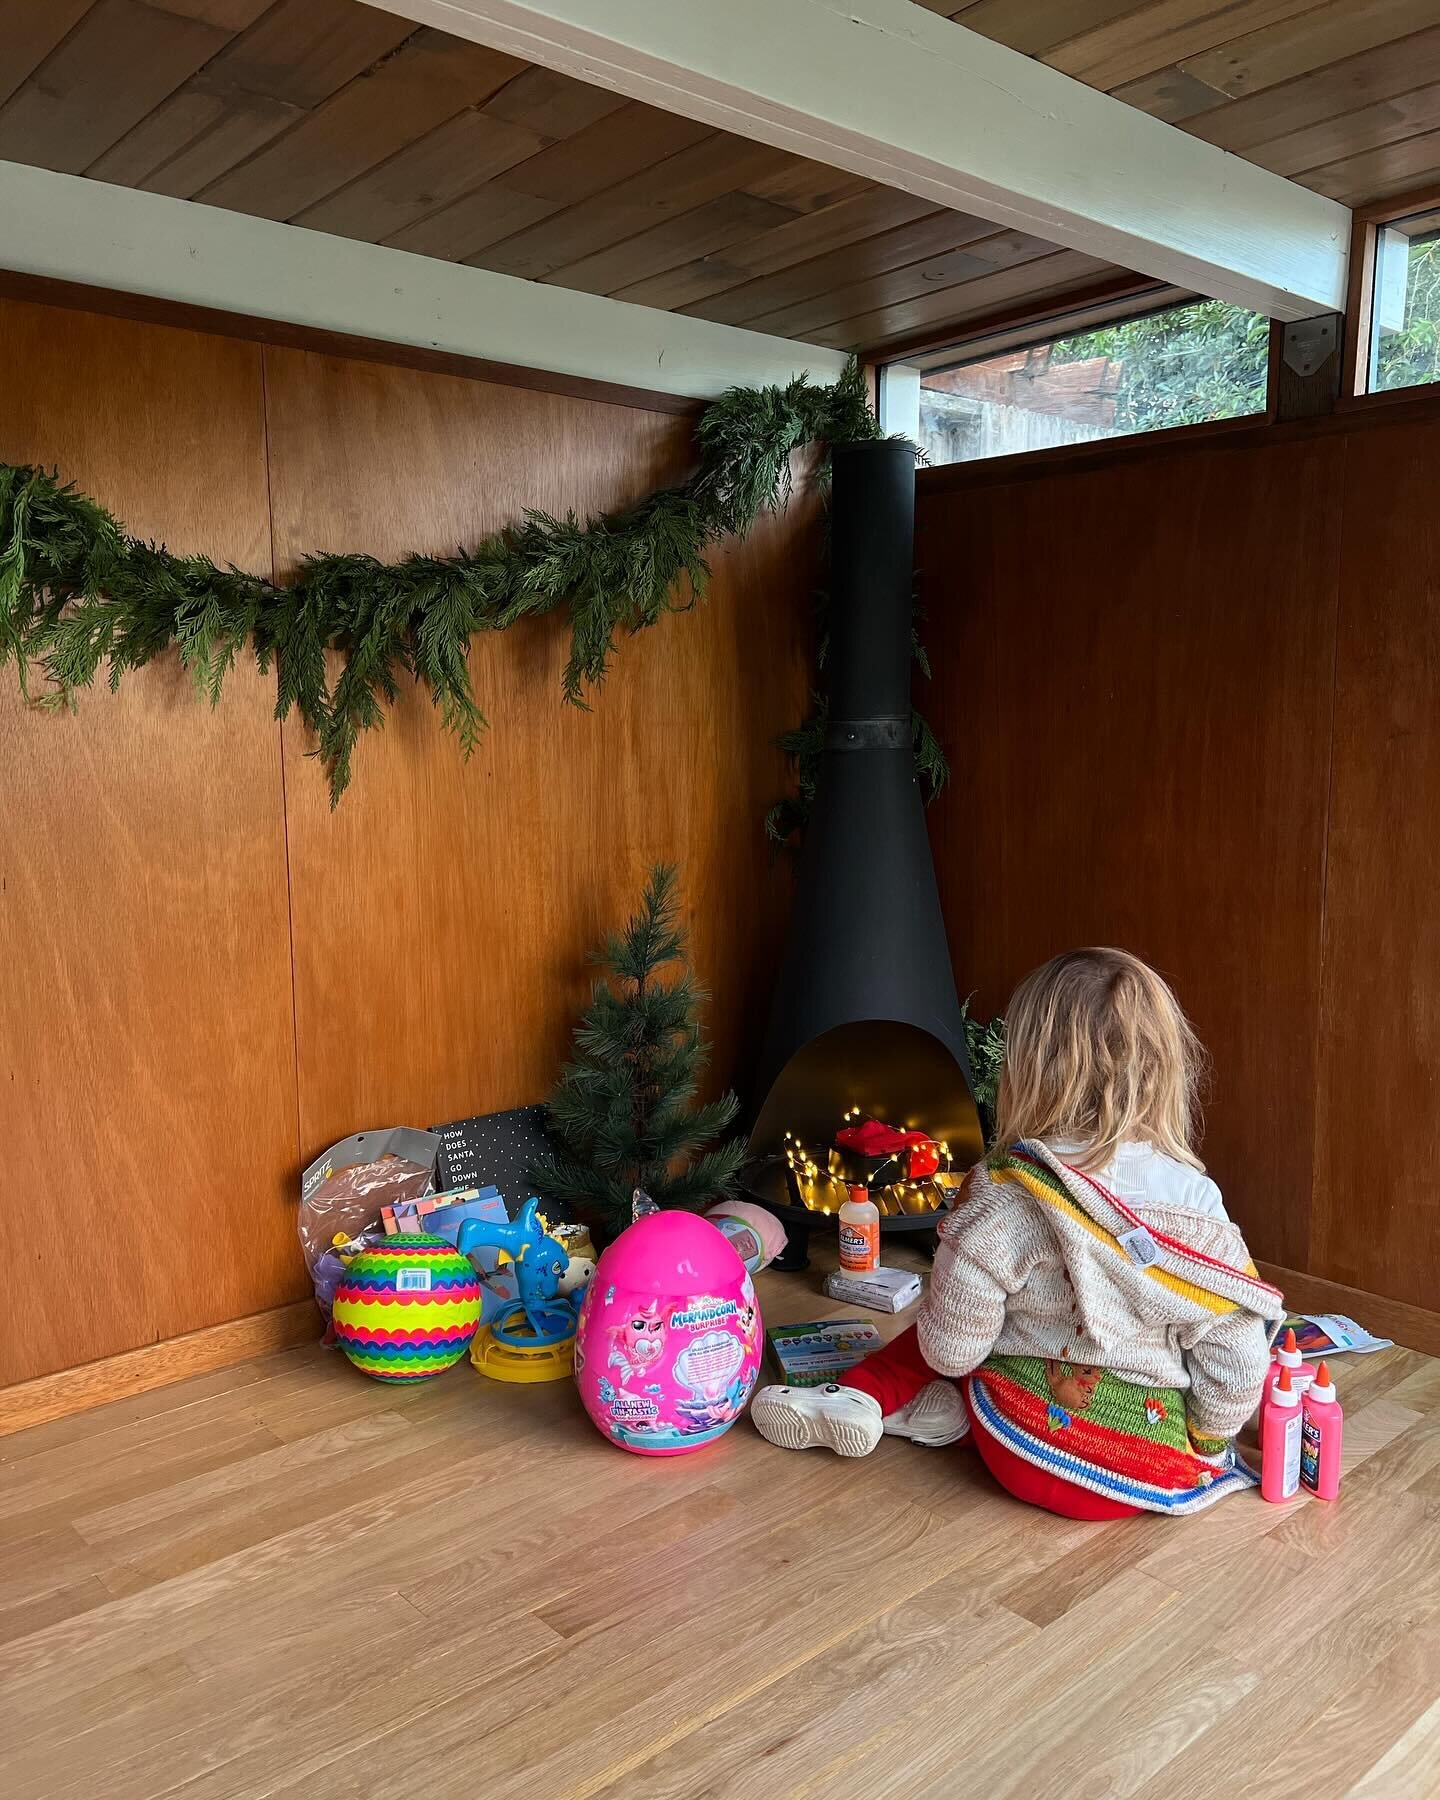 The playhouse is done! Best gift ever. Merry Christmas friends 🎄🎅🏼🎁 #minieichler #mcmplayhouse #eichler  #mcm